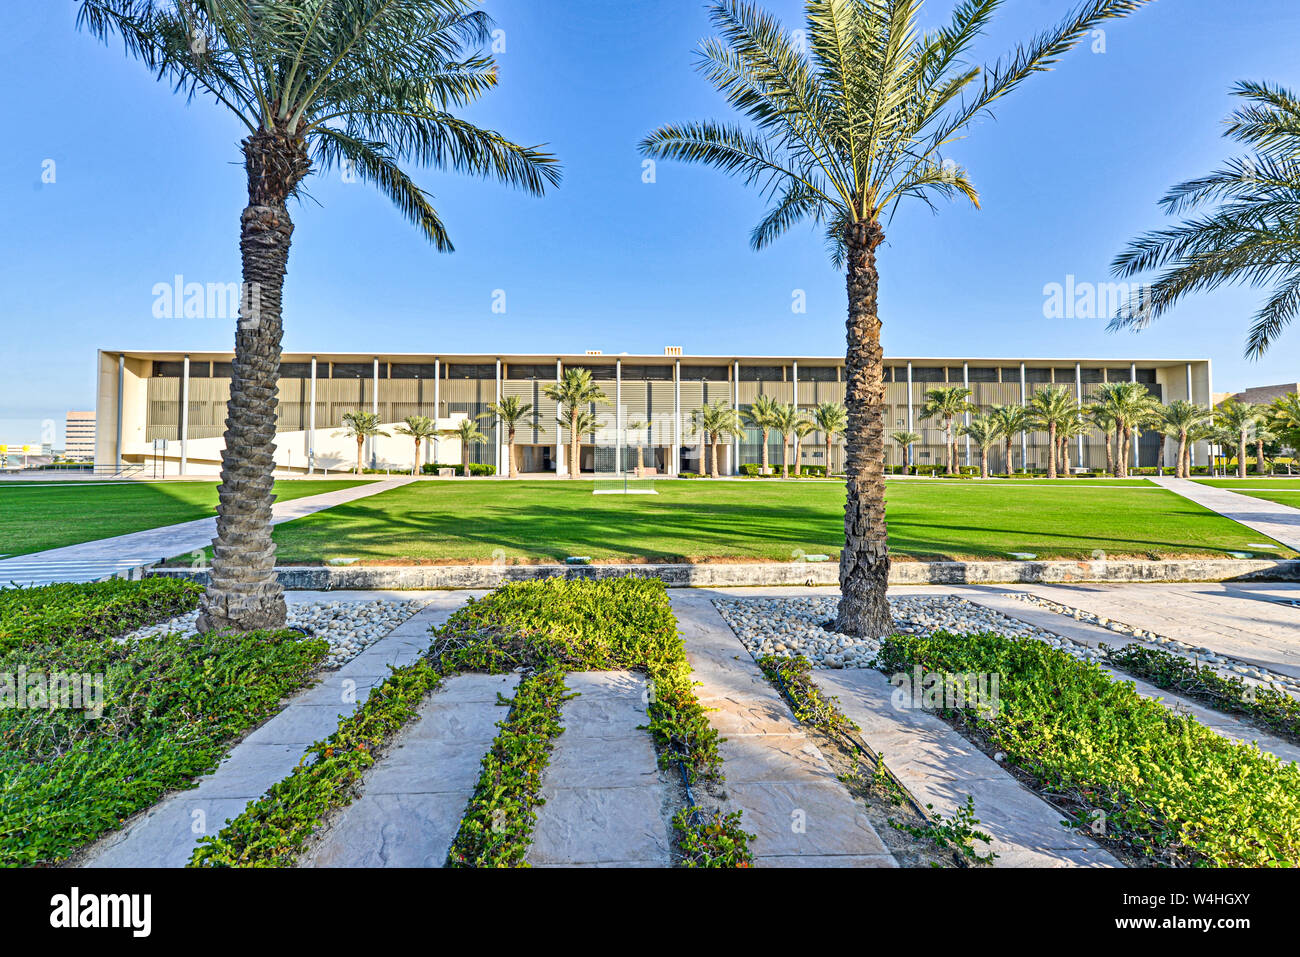 DOHA, QATAR - JANUARY 1, 2016: Contemporary architecture and formal lawn at the Education City, Doha taken during a winter late afternoon Stock Photo